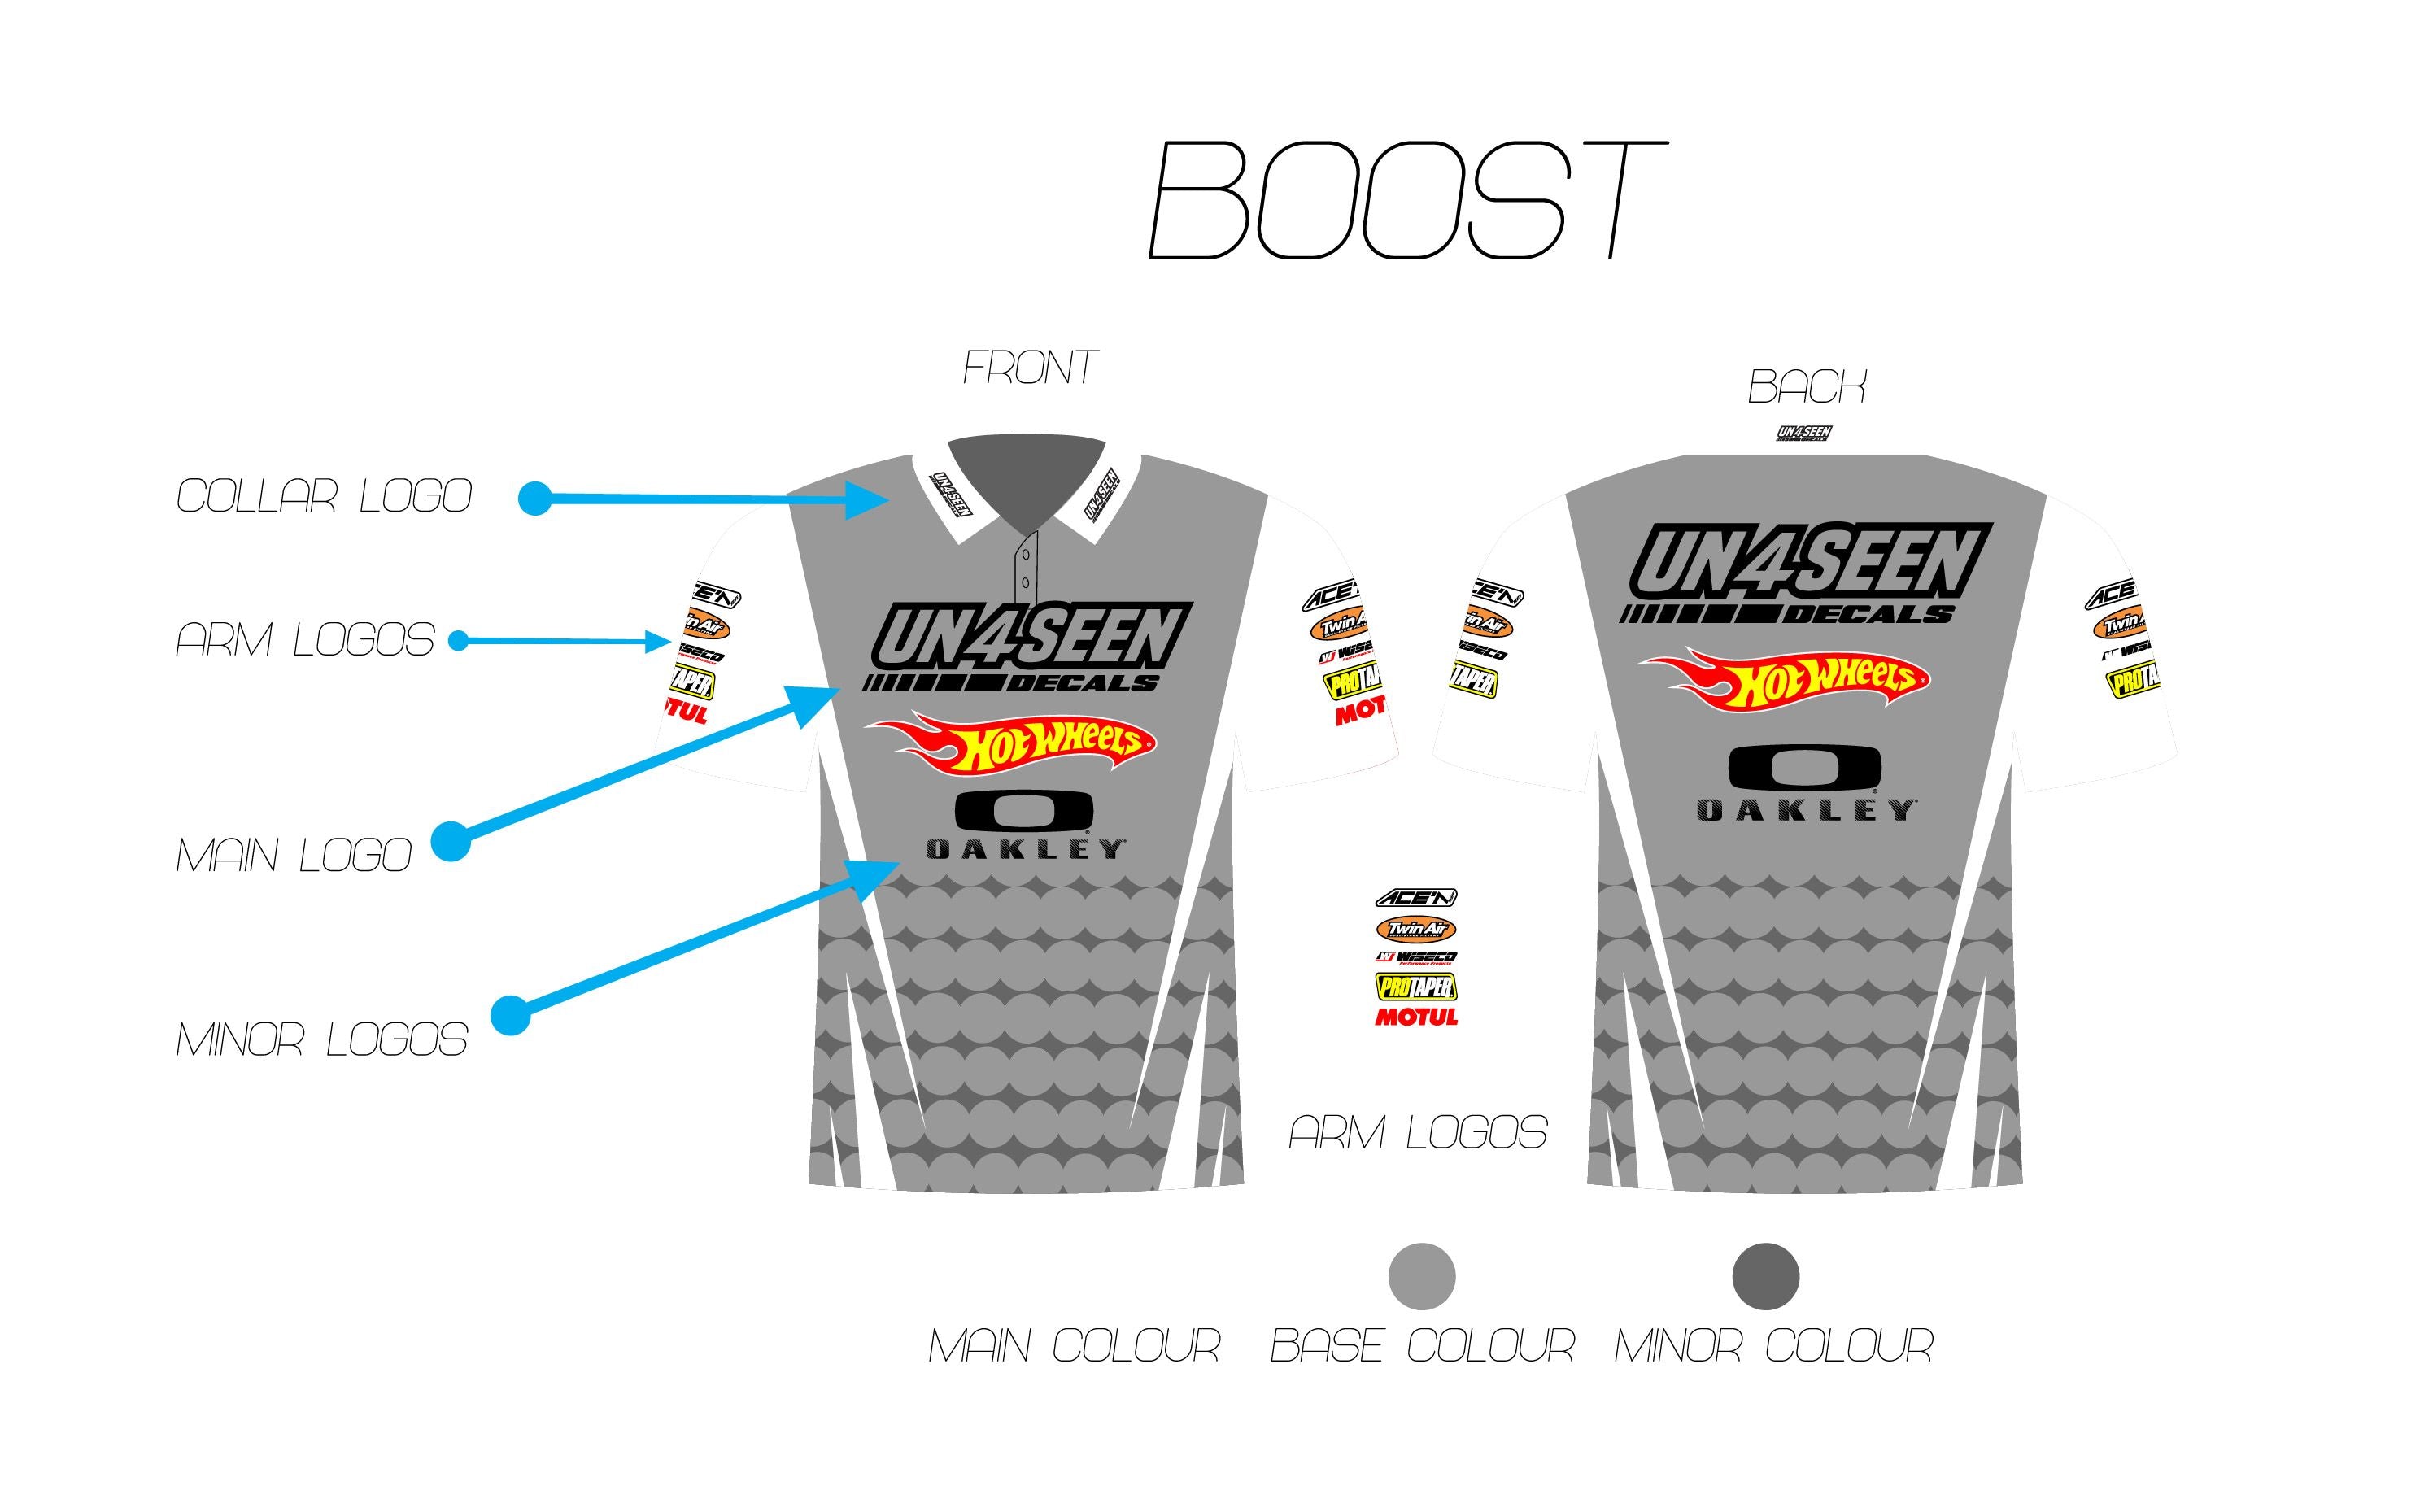 Custom Made Pitshirts / Polo Tops - Boost